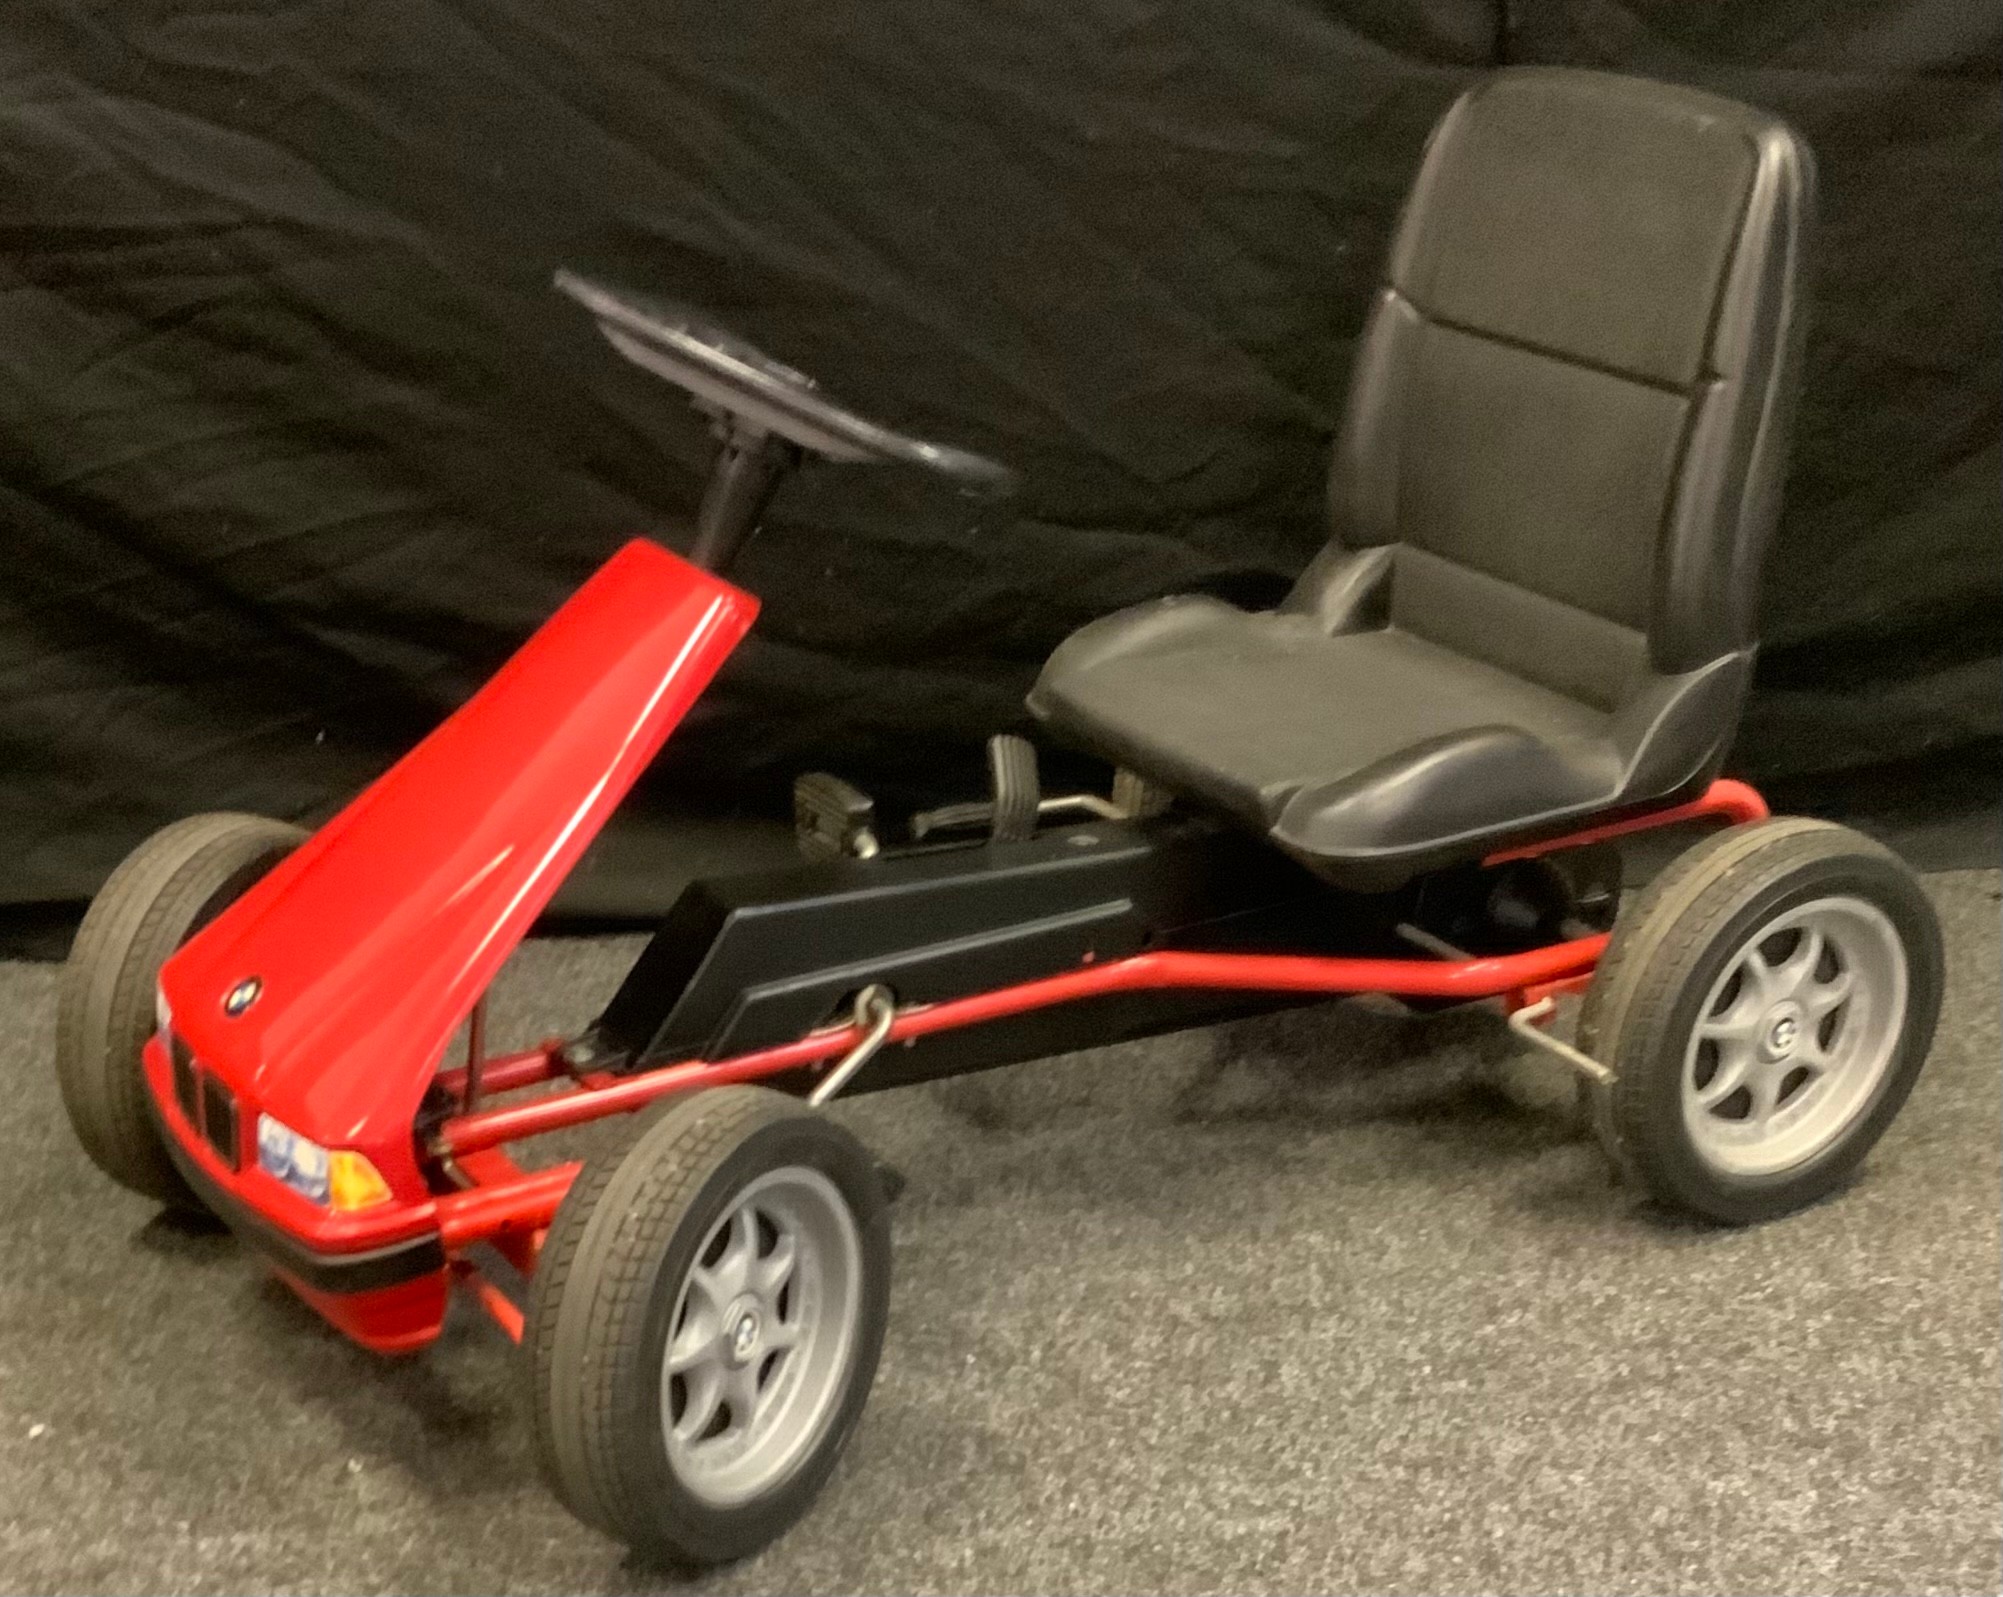 A BMW go-cart, peddle powered, plastic seat and tyres, red metal chassis, 92cm long, 56cm wide.